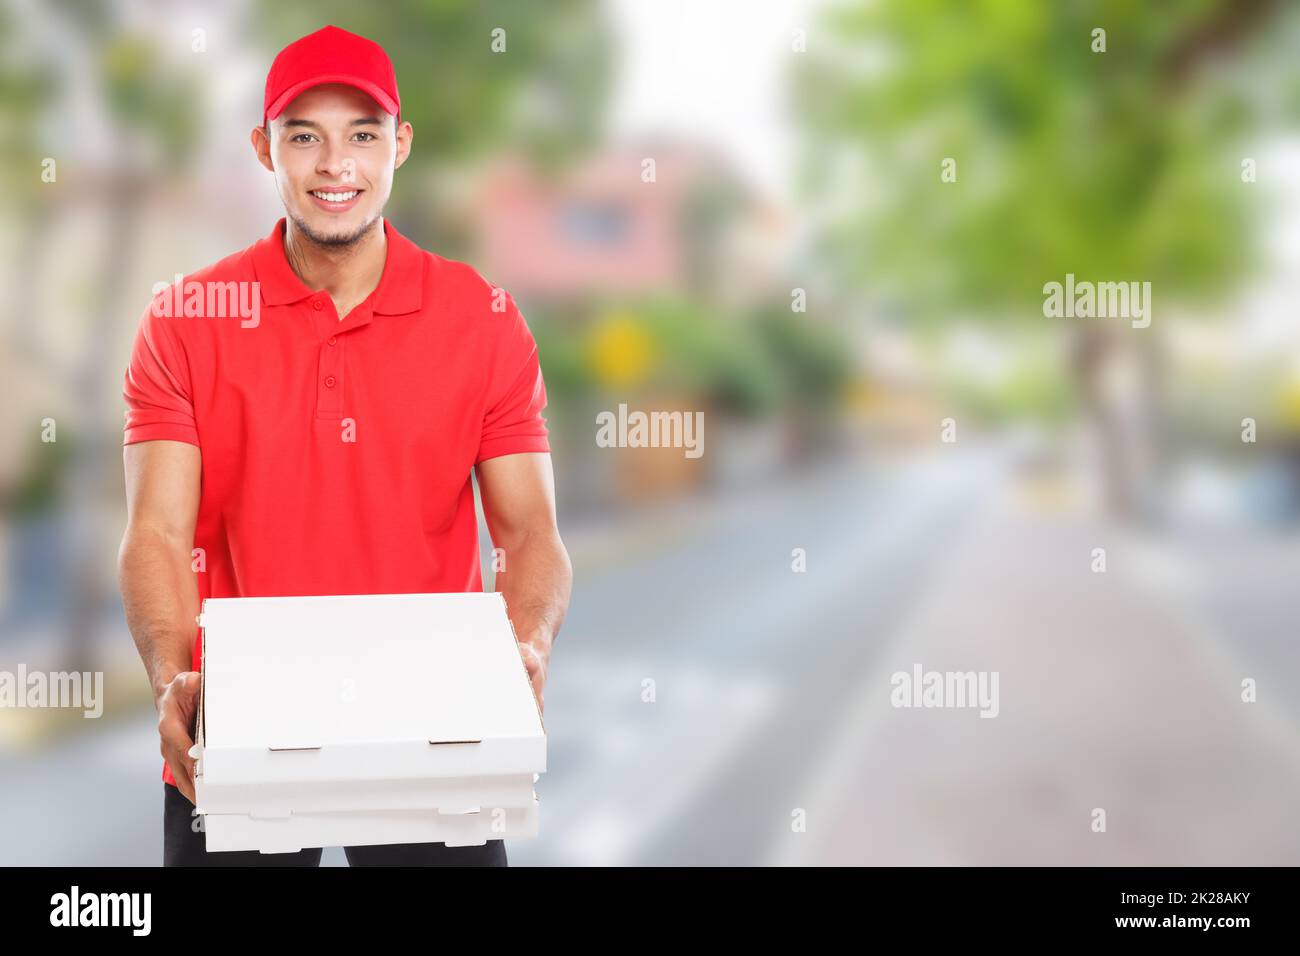 Pizza fast food delivery young latin man town copyspace copy space order delivering deliver Stock Photo